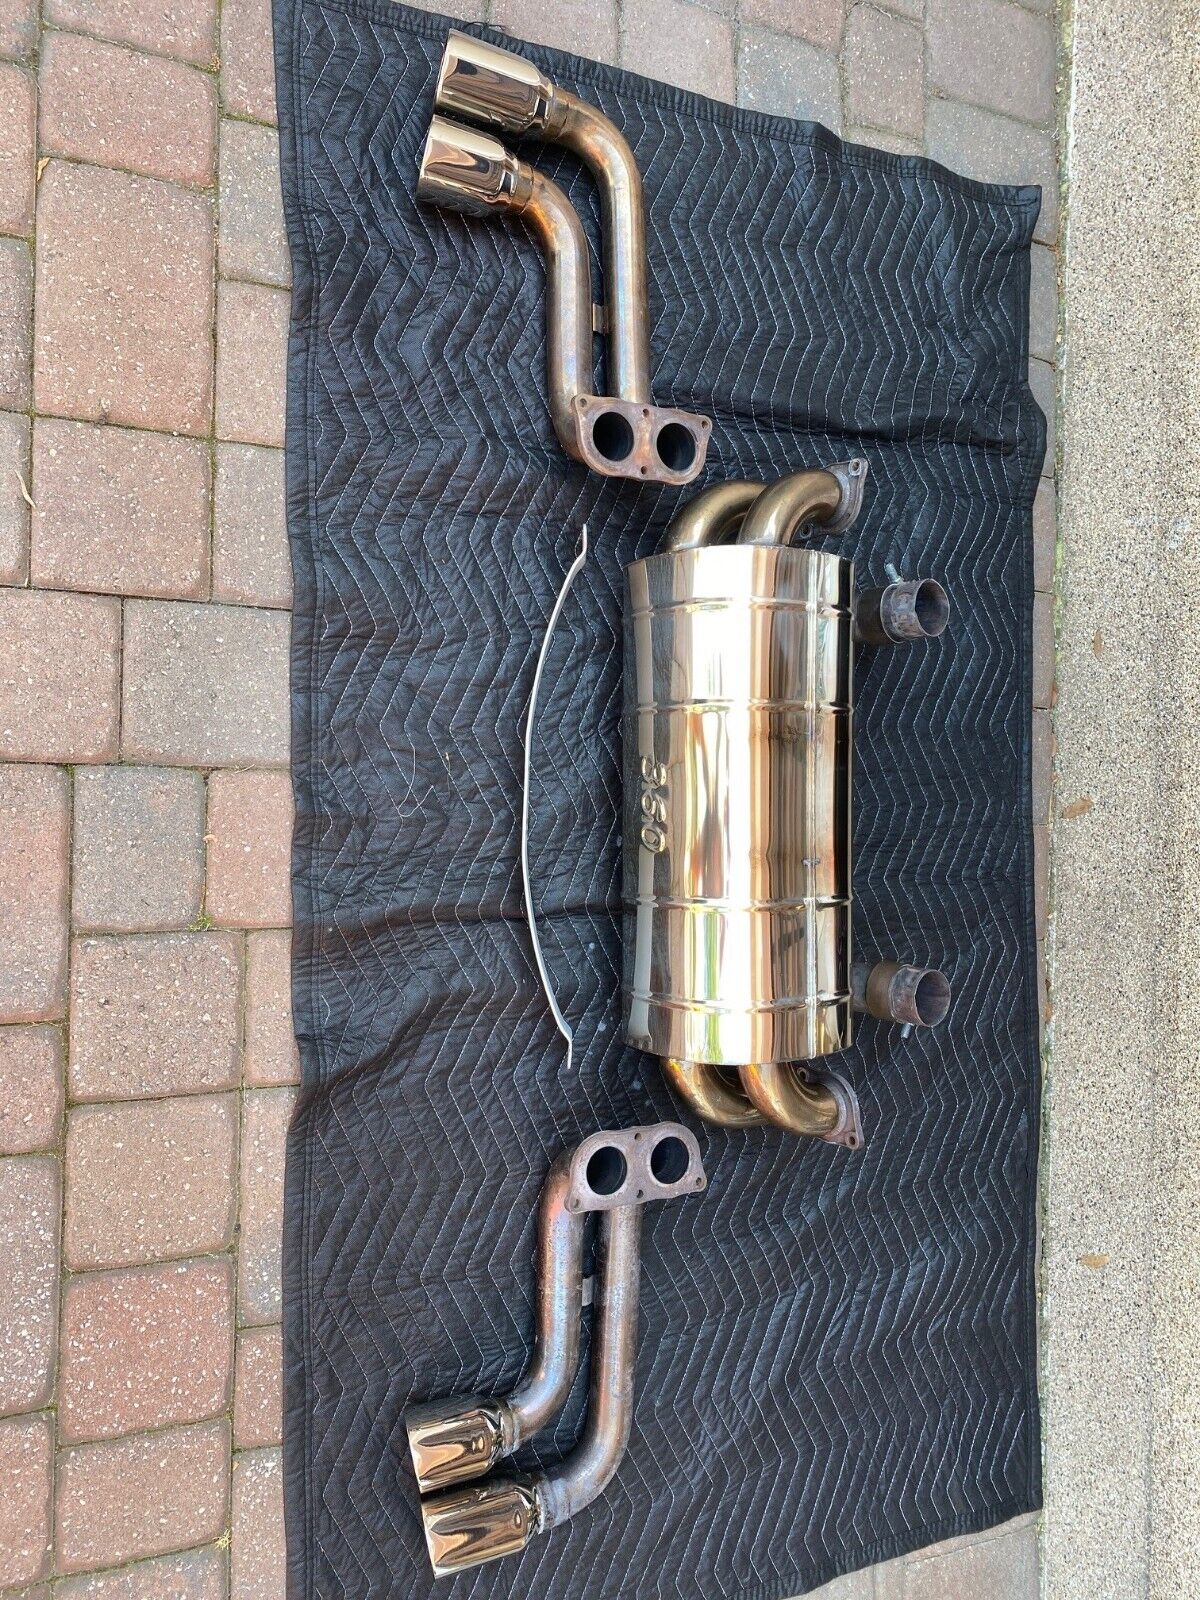 Ferrari 360 Tubi Exhaust System with Muffler and Side Pipes - Own the Best